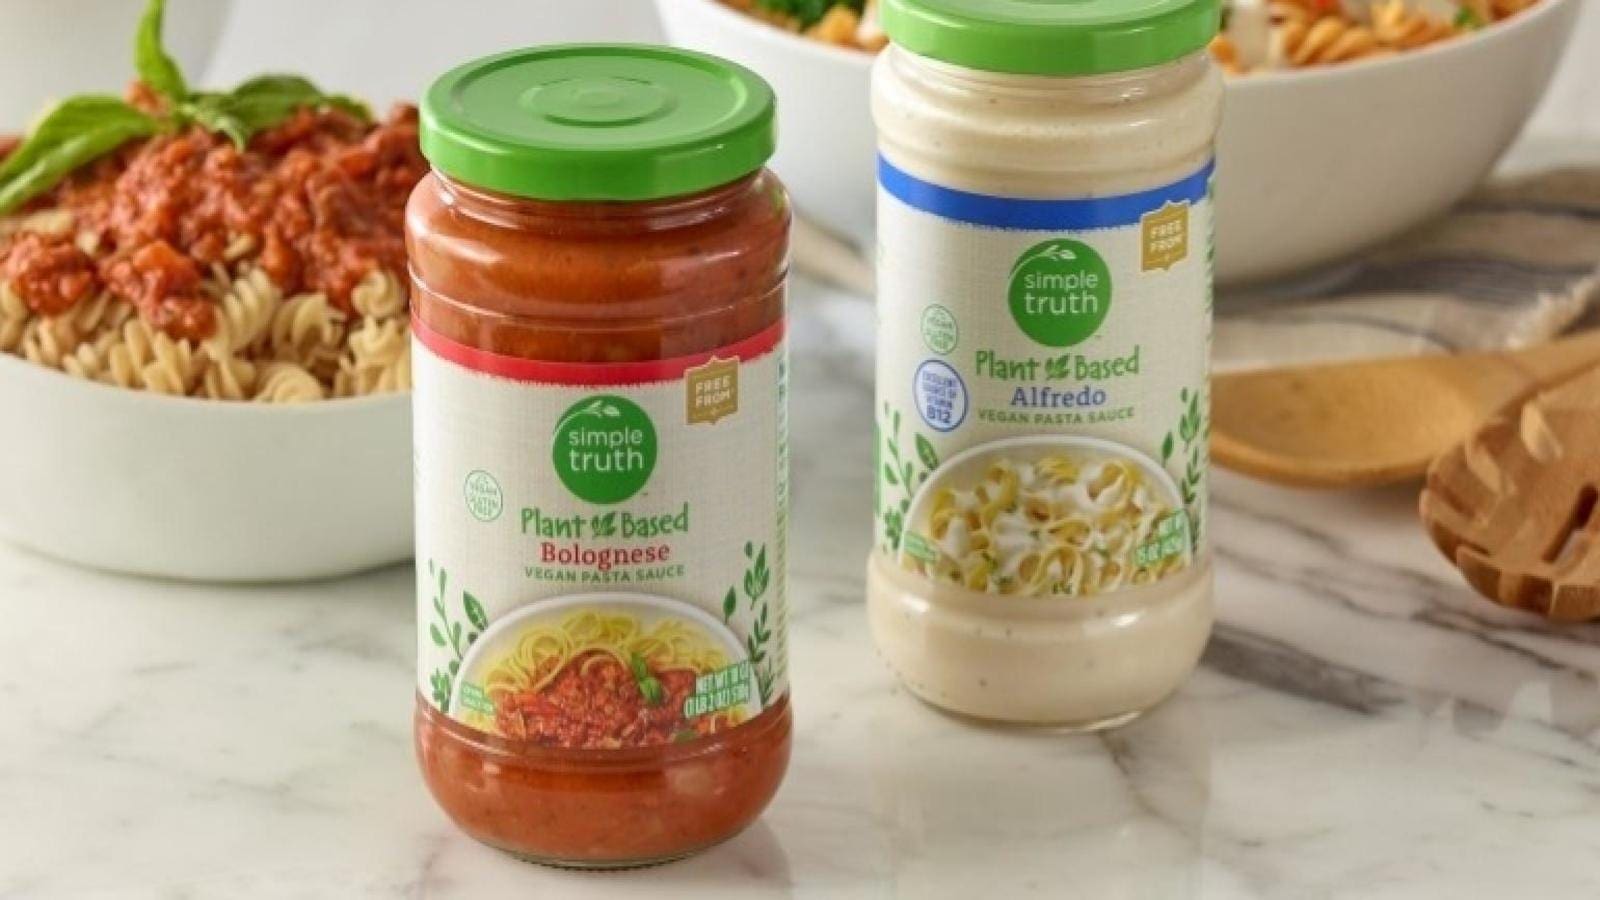 Kroger expands its plant-based portfolio with the launch of 50 new products